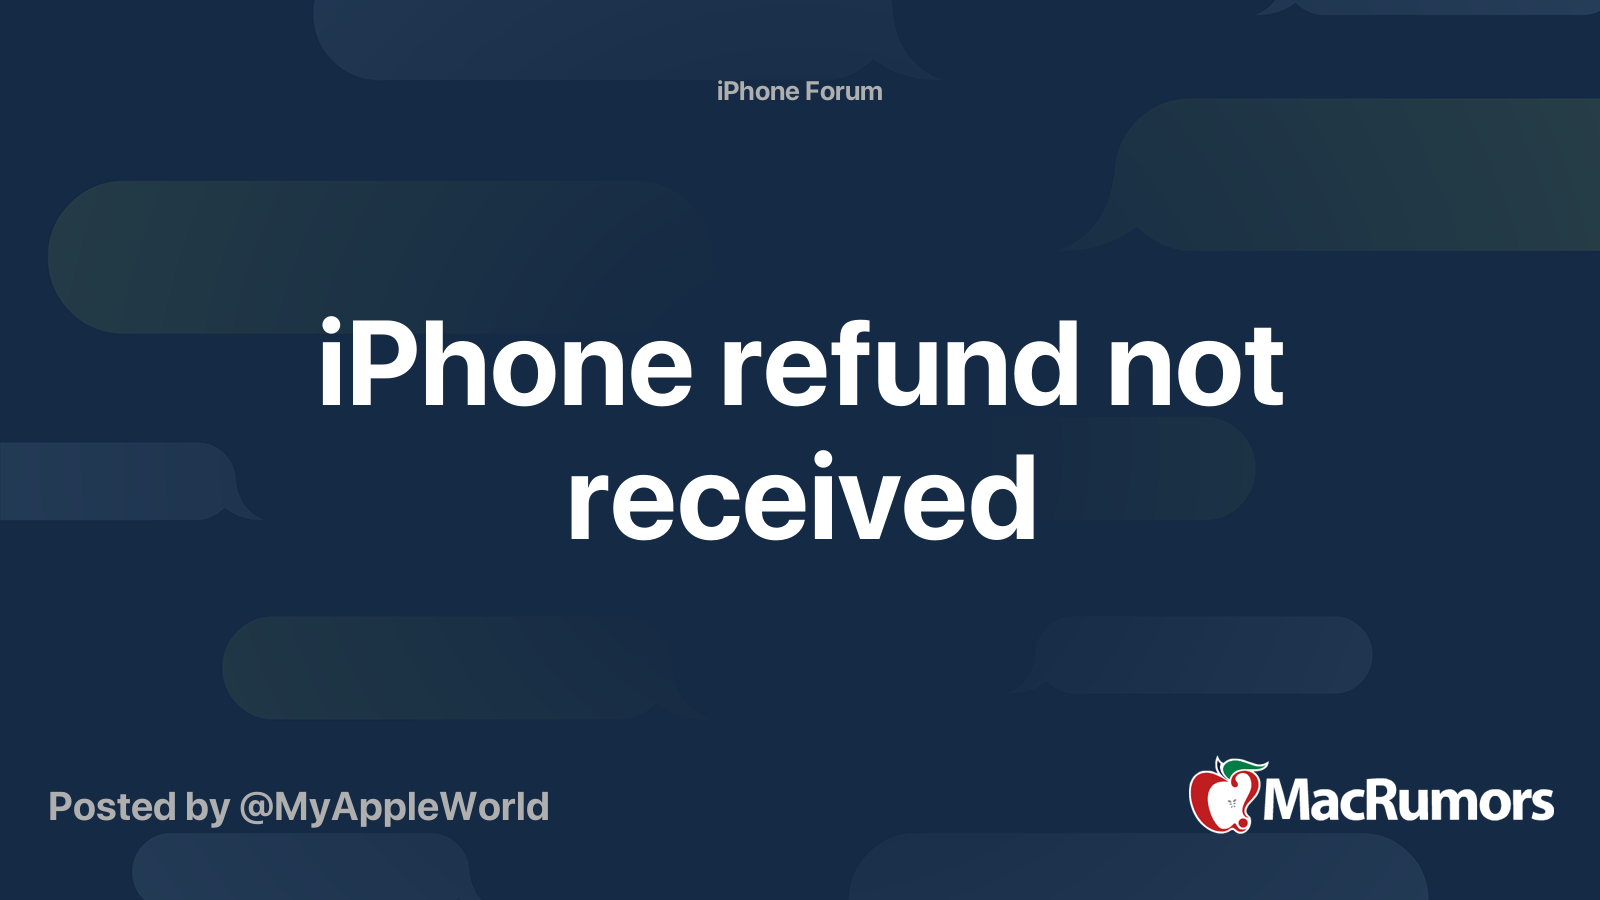 iphone-refund-not-received-macrumors-forums